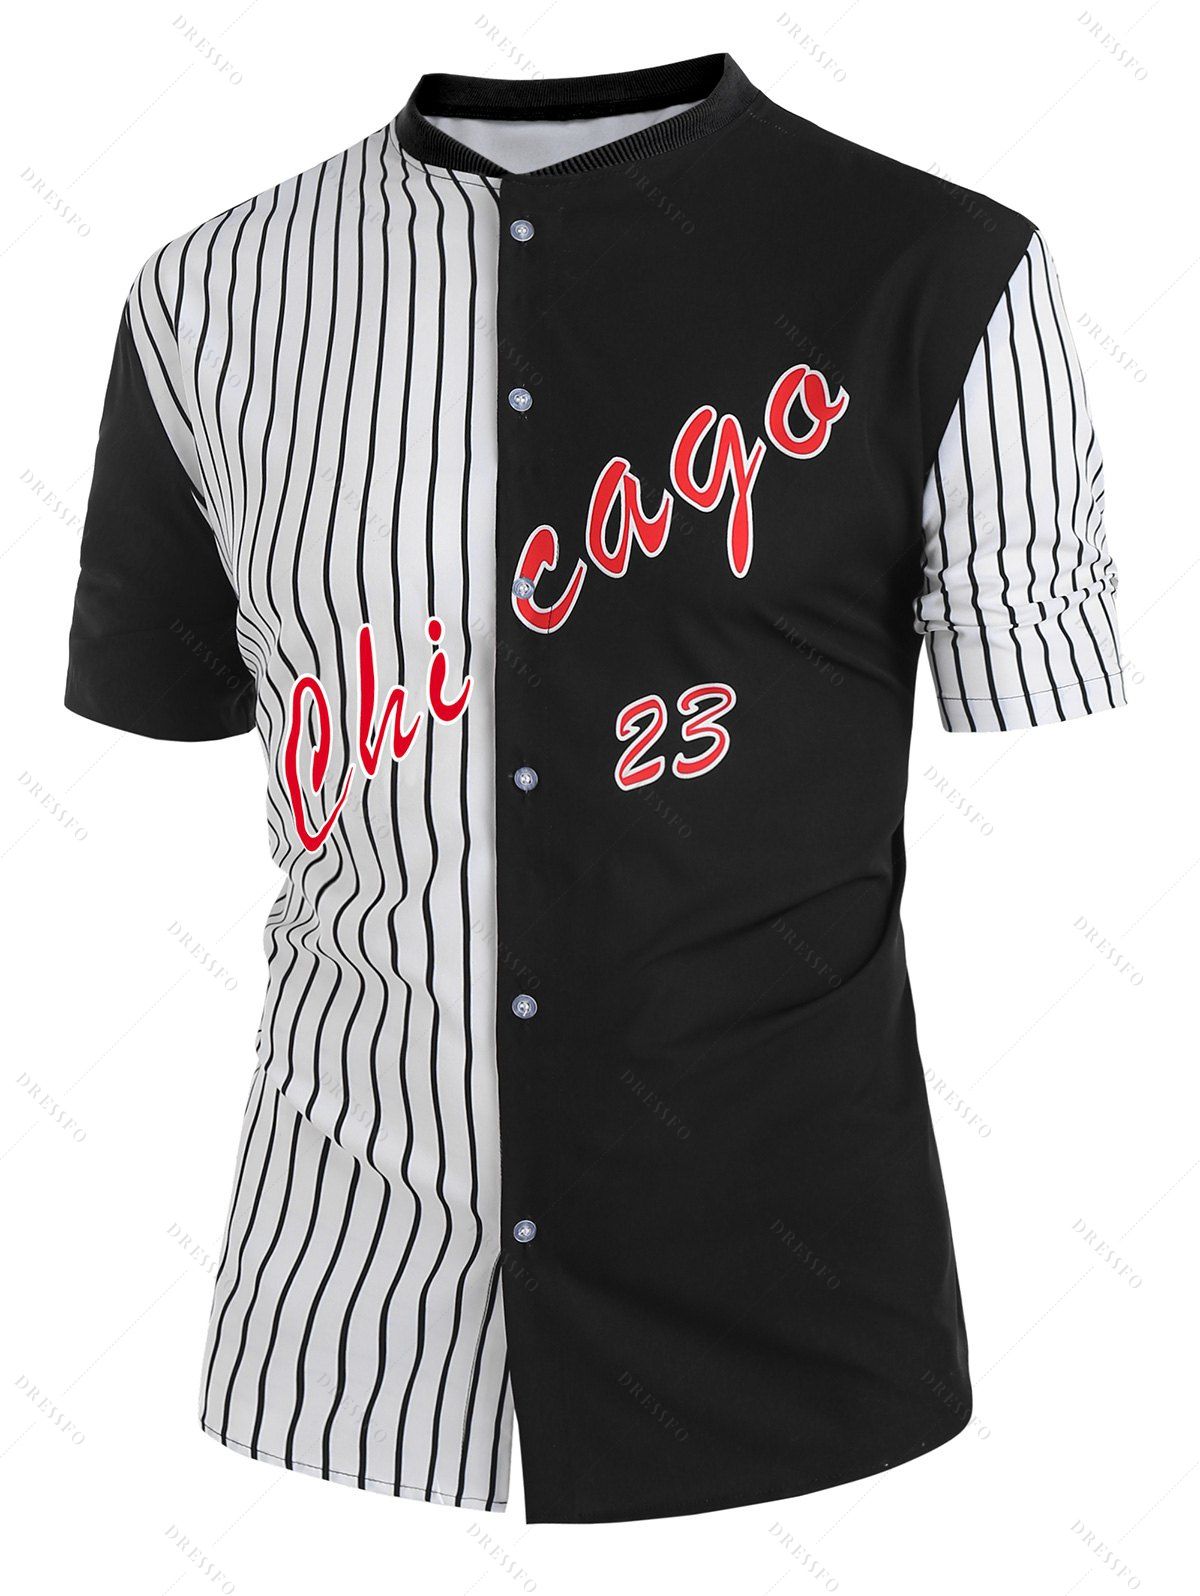 Chicago Two Tone Stripe Half And Half Print Shirt Ribbed Stand Collar Short Sleeve Contrast Shirt - BLACK 2XL